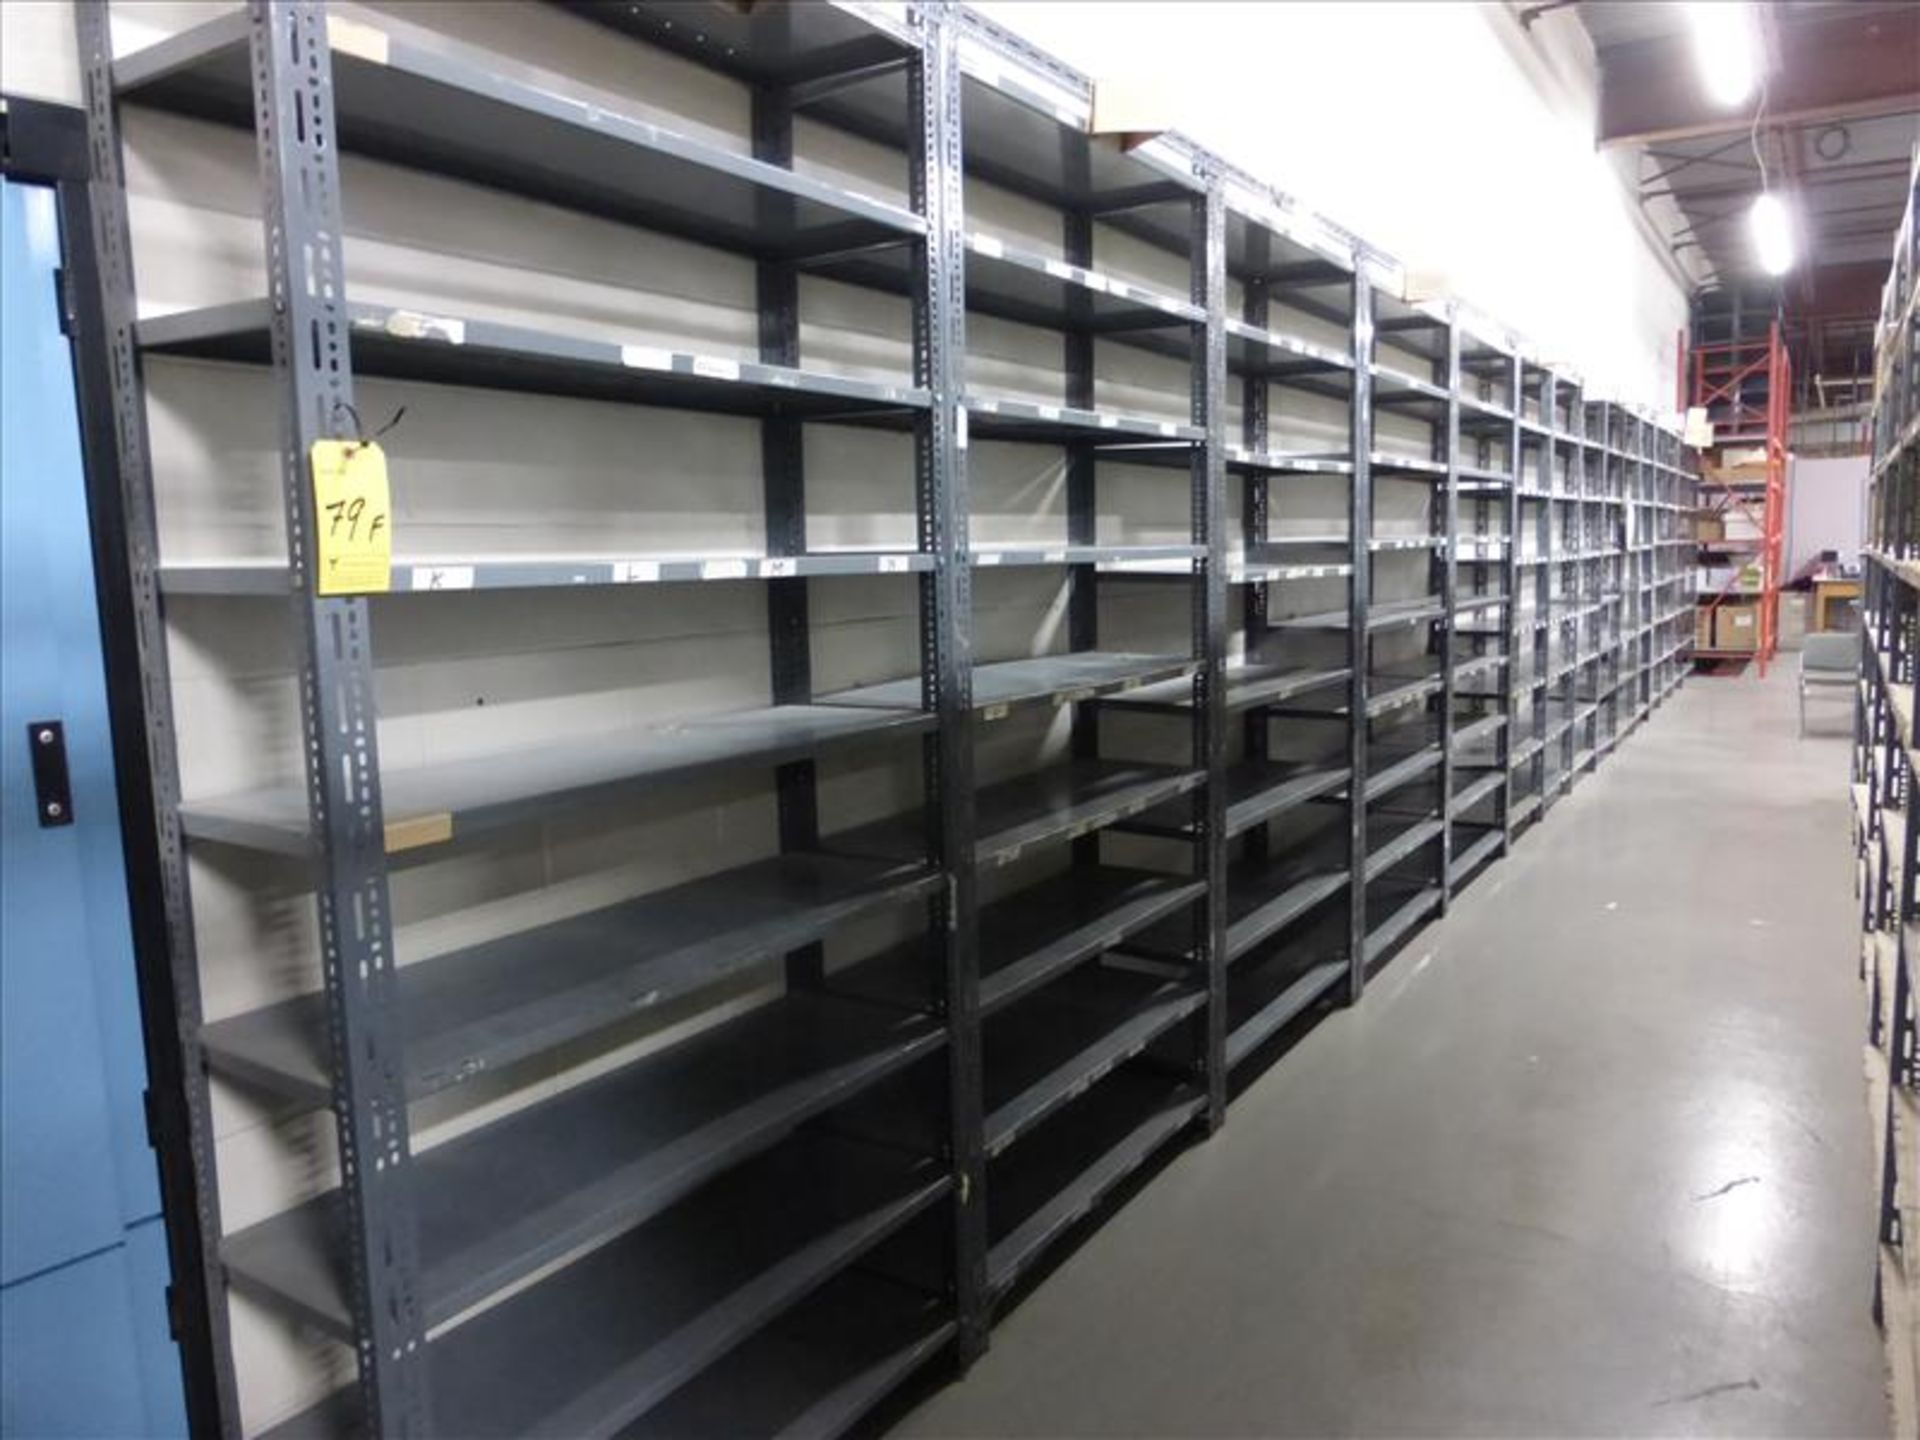 (15) Sections of Dexion shelving, 4 ft. x 15 in.